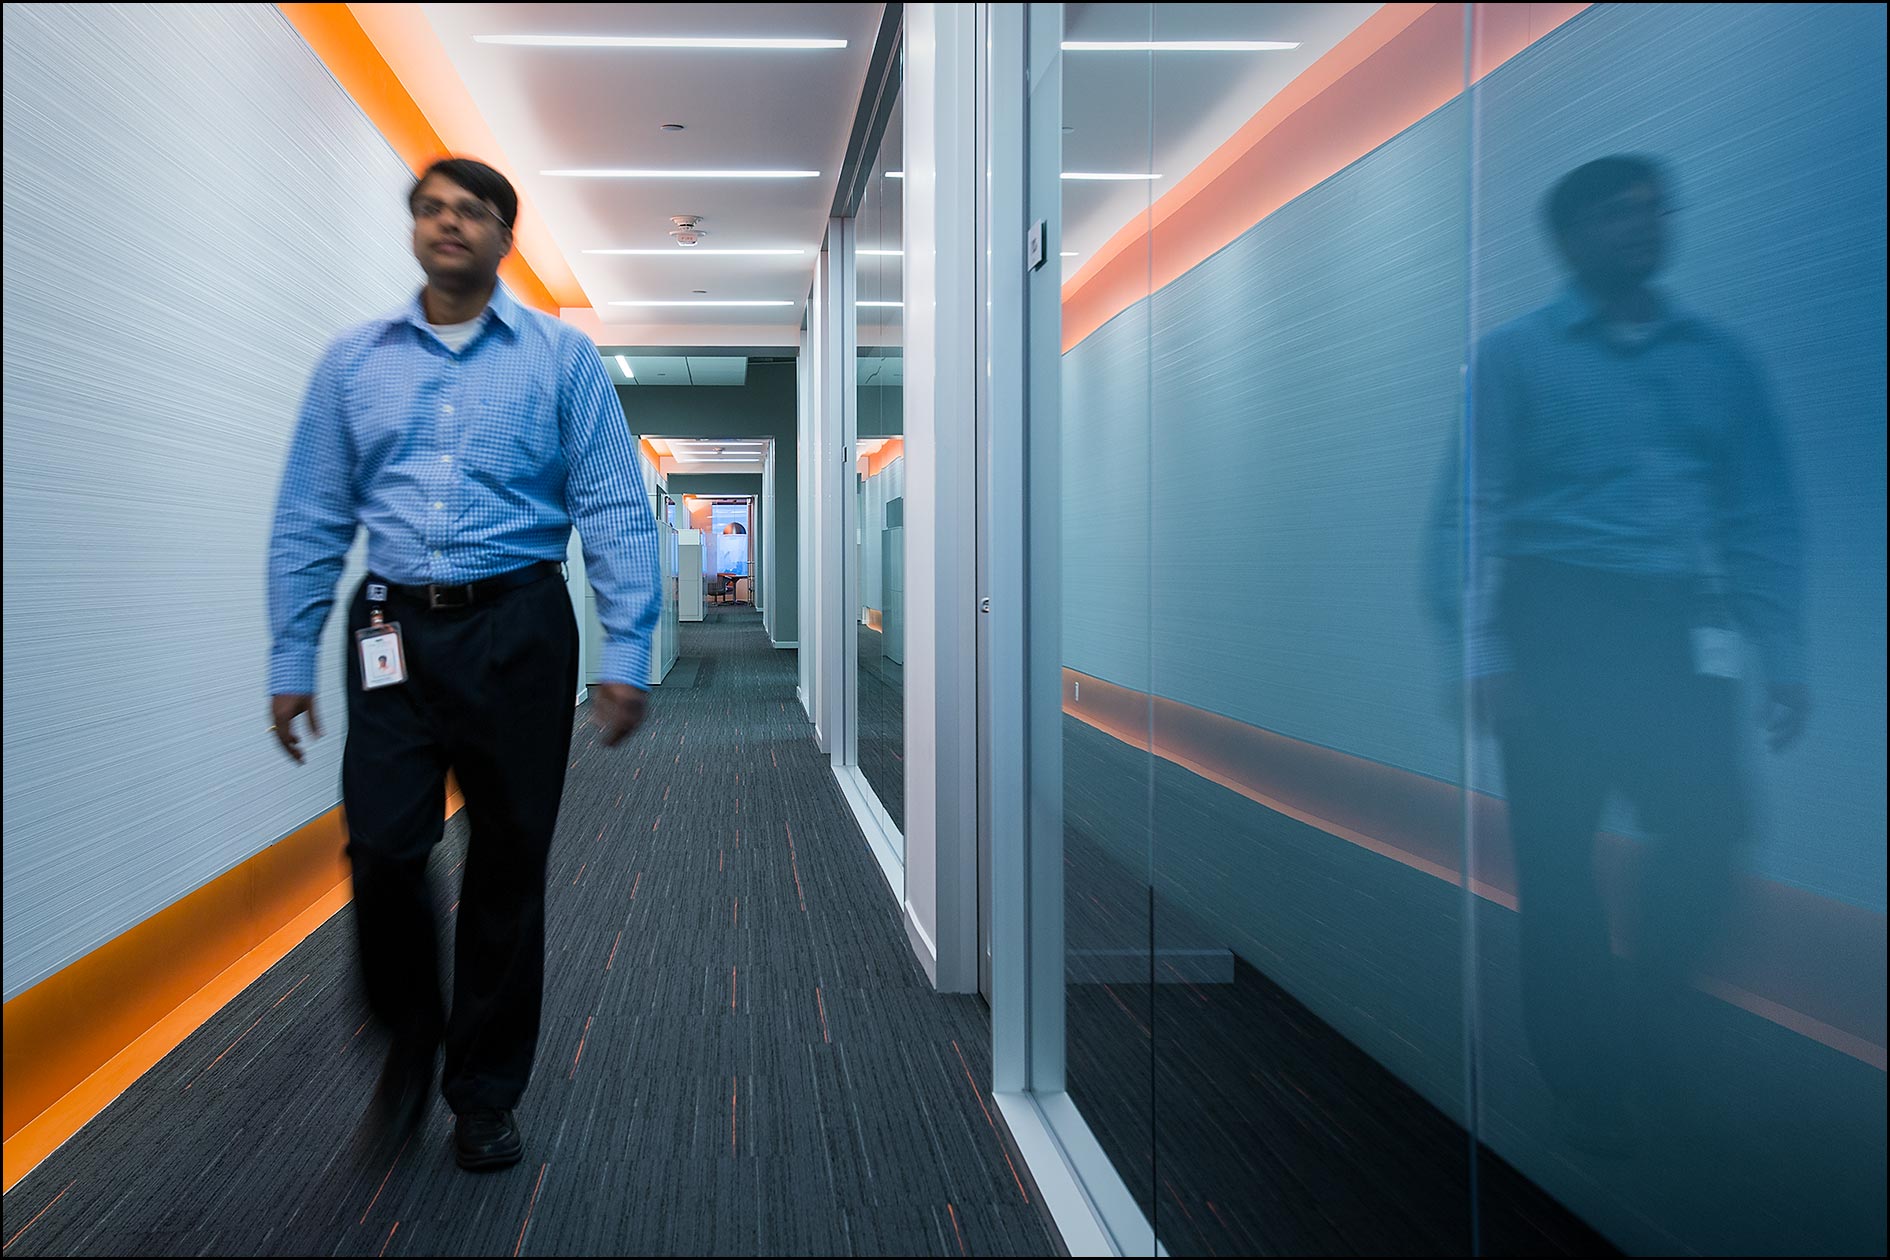 A male employee walks in a hallway with contemporary architectural decor with his reflection in a glass window.